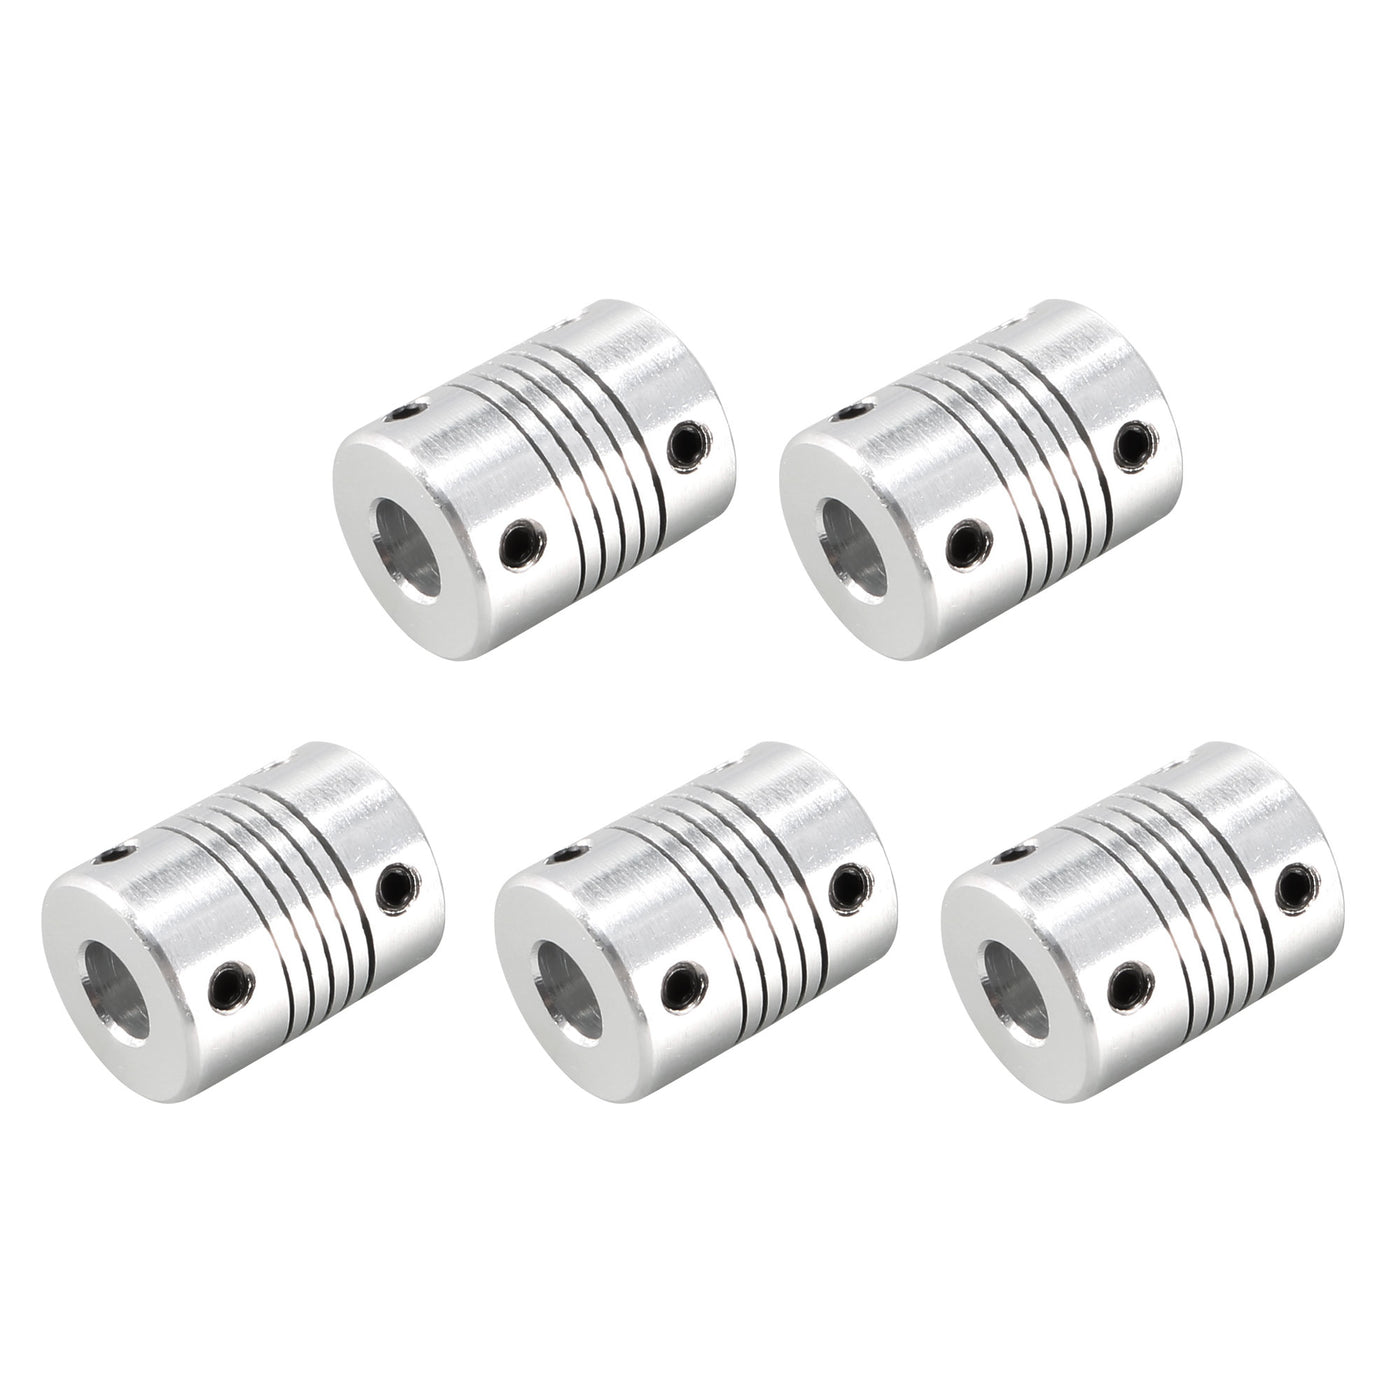 uxcell Uxcell 6.35mm to 8mm Aluminum Alloy Shaft Coupling Flexible Coupler L25xD19 Silver,5pcs